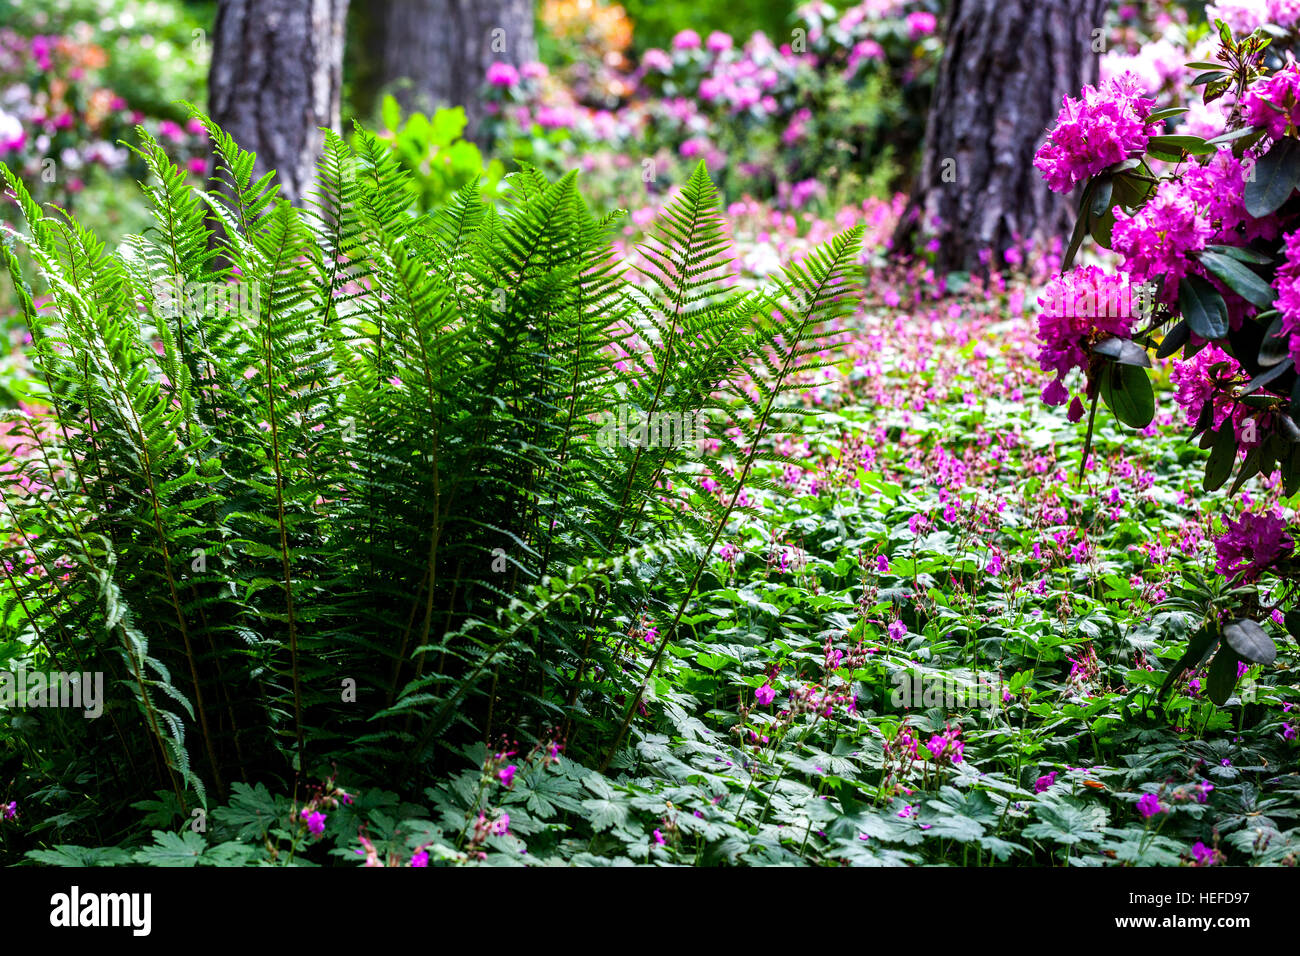 Growing ferns and under the pines and blooming rhododendrons, geranium as a ground cover flowering plant Stock Photo